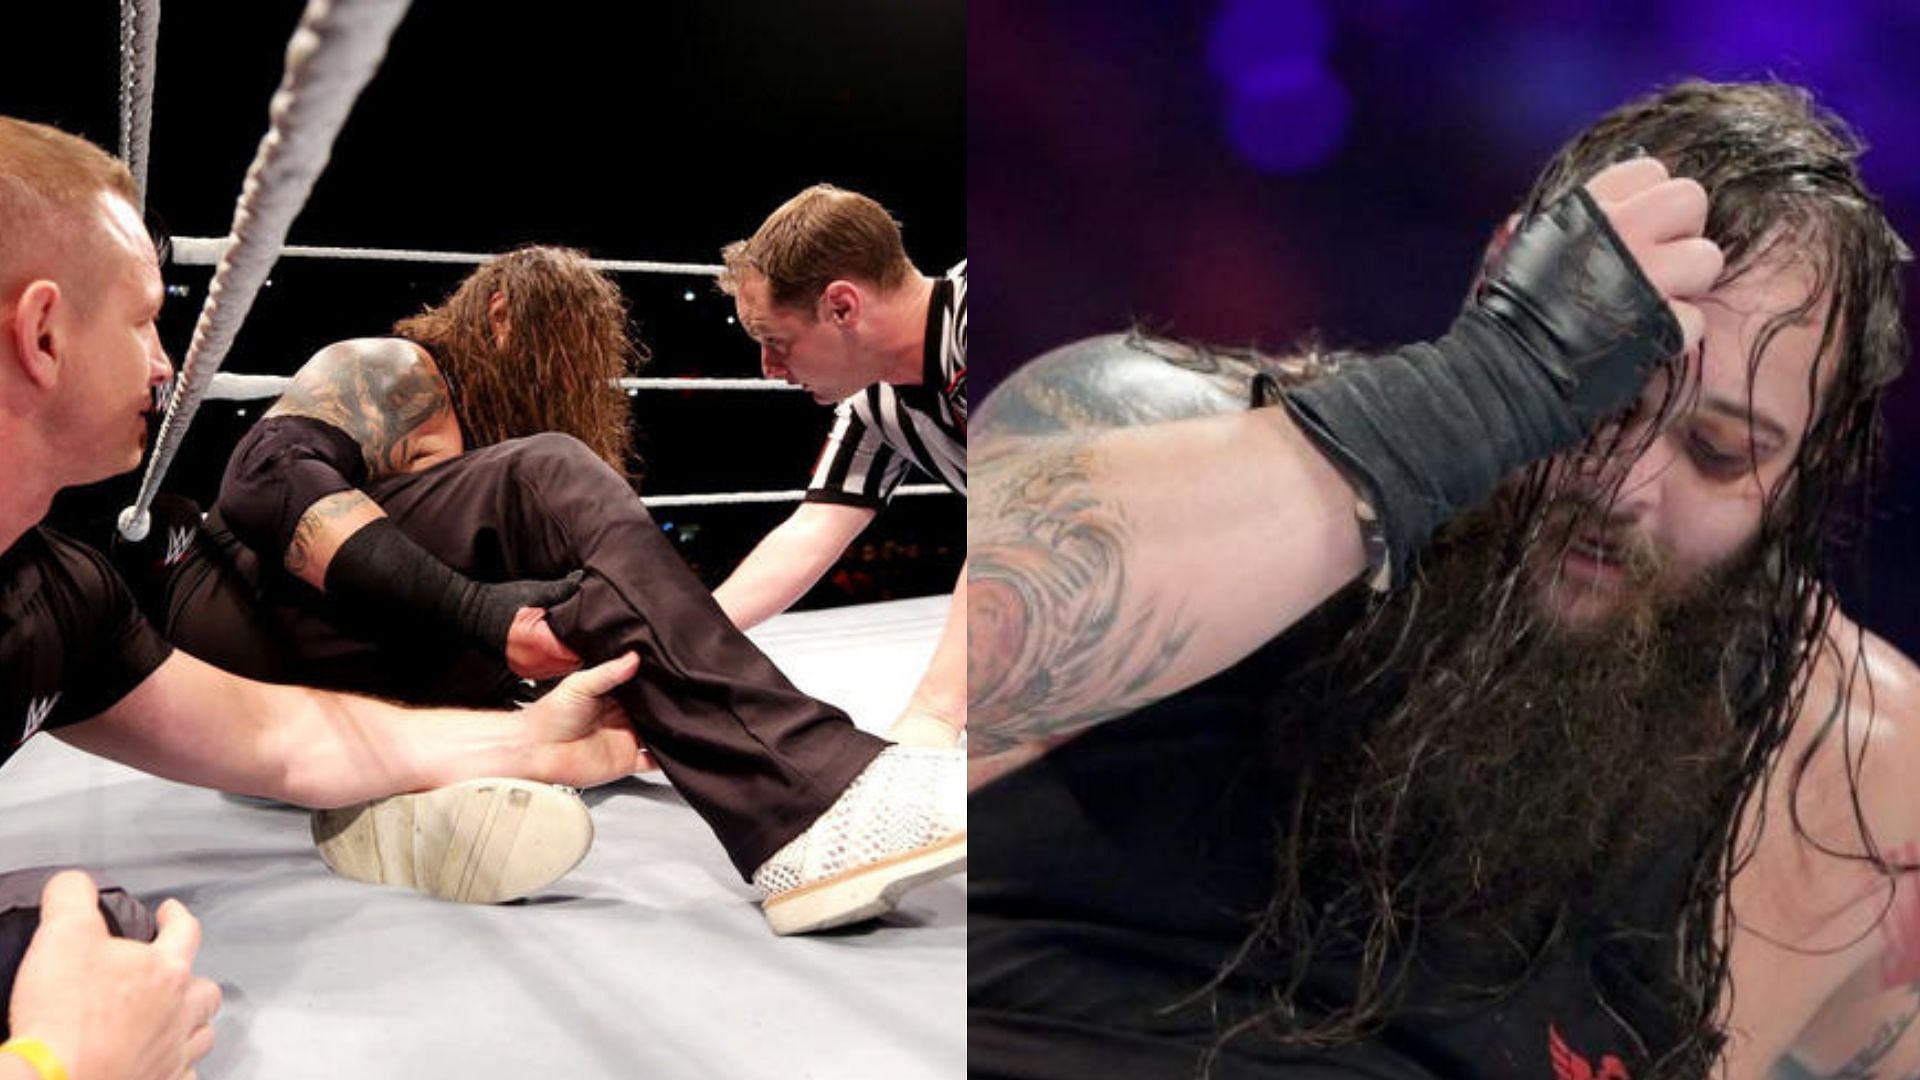 WWE Superstar Bray Wyatt reportedly sustained a physical issue